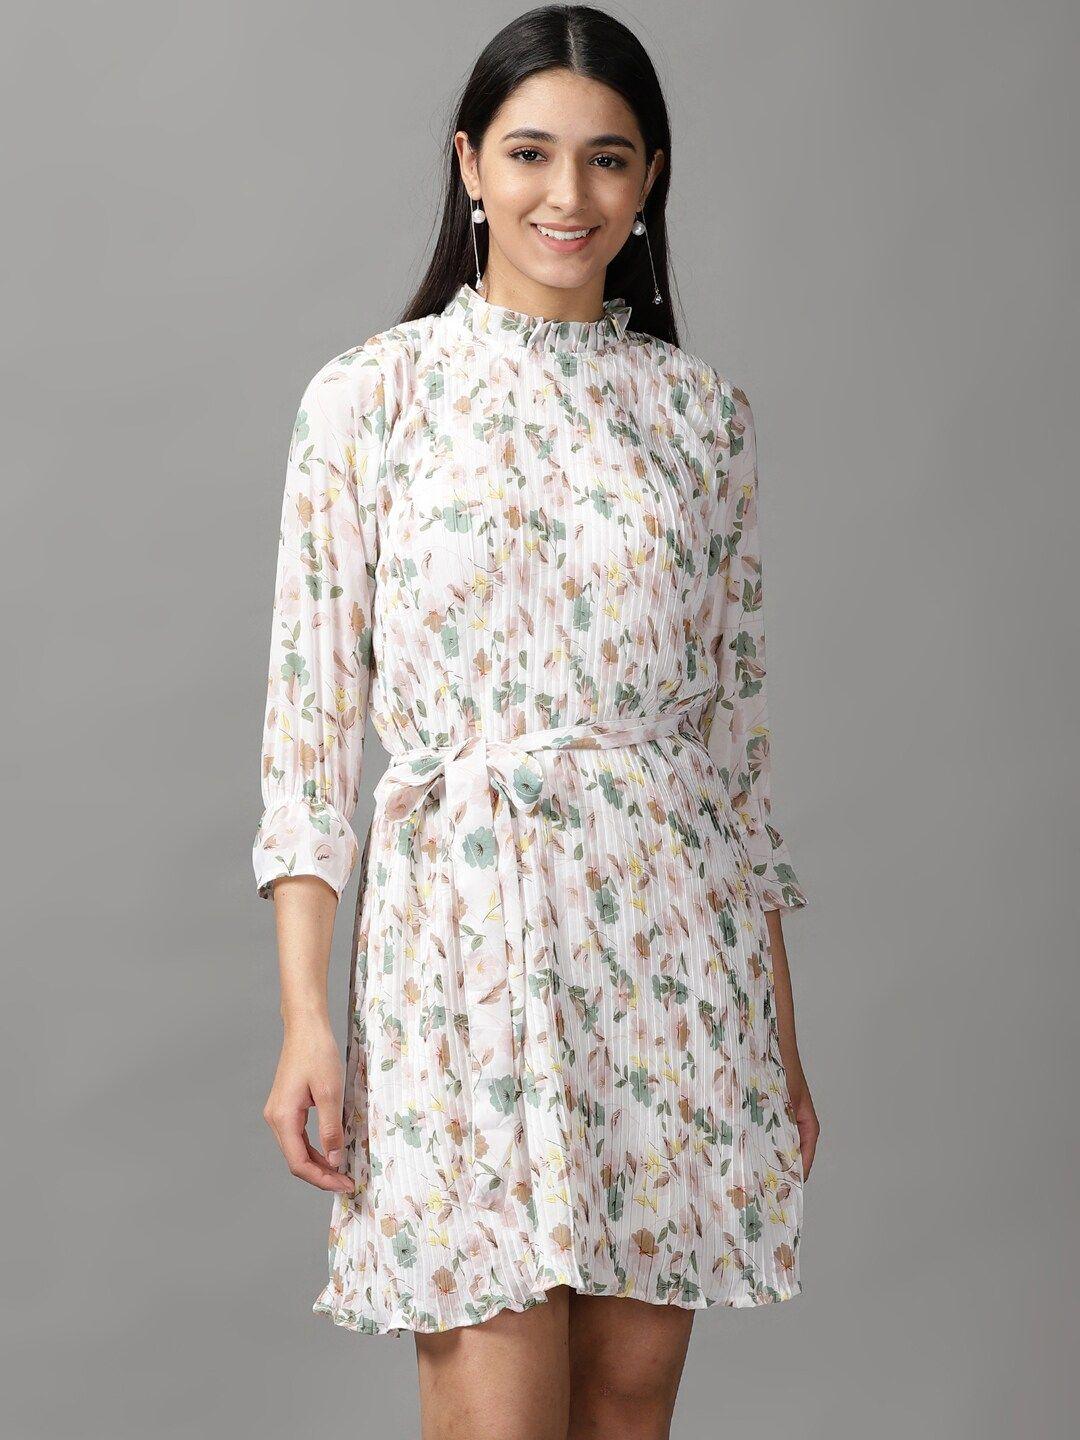 showoff-women-white-&-green-floral-printed-dress